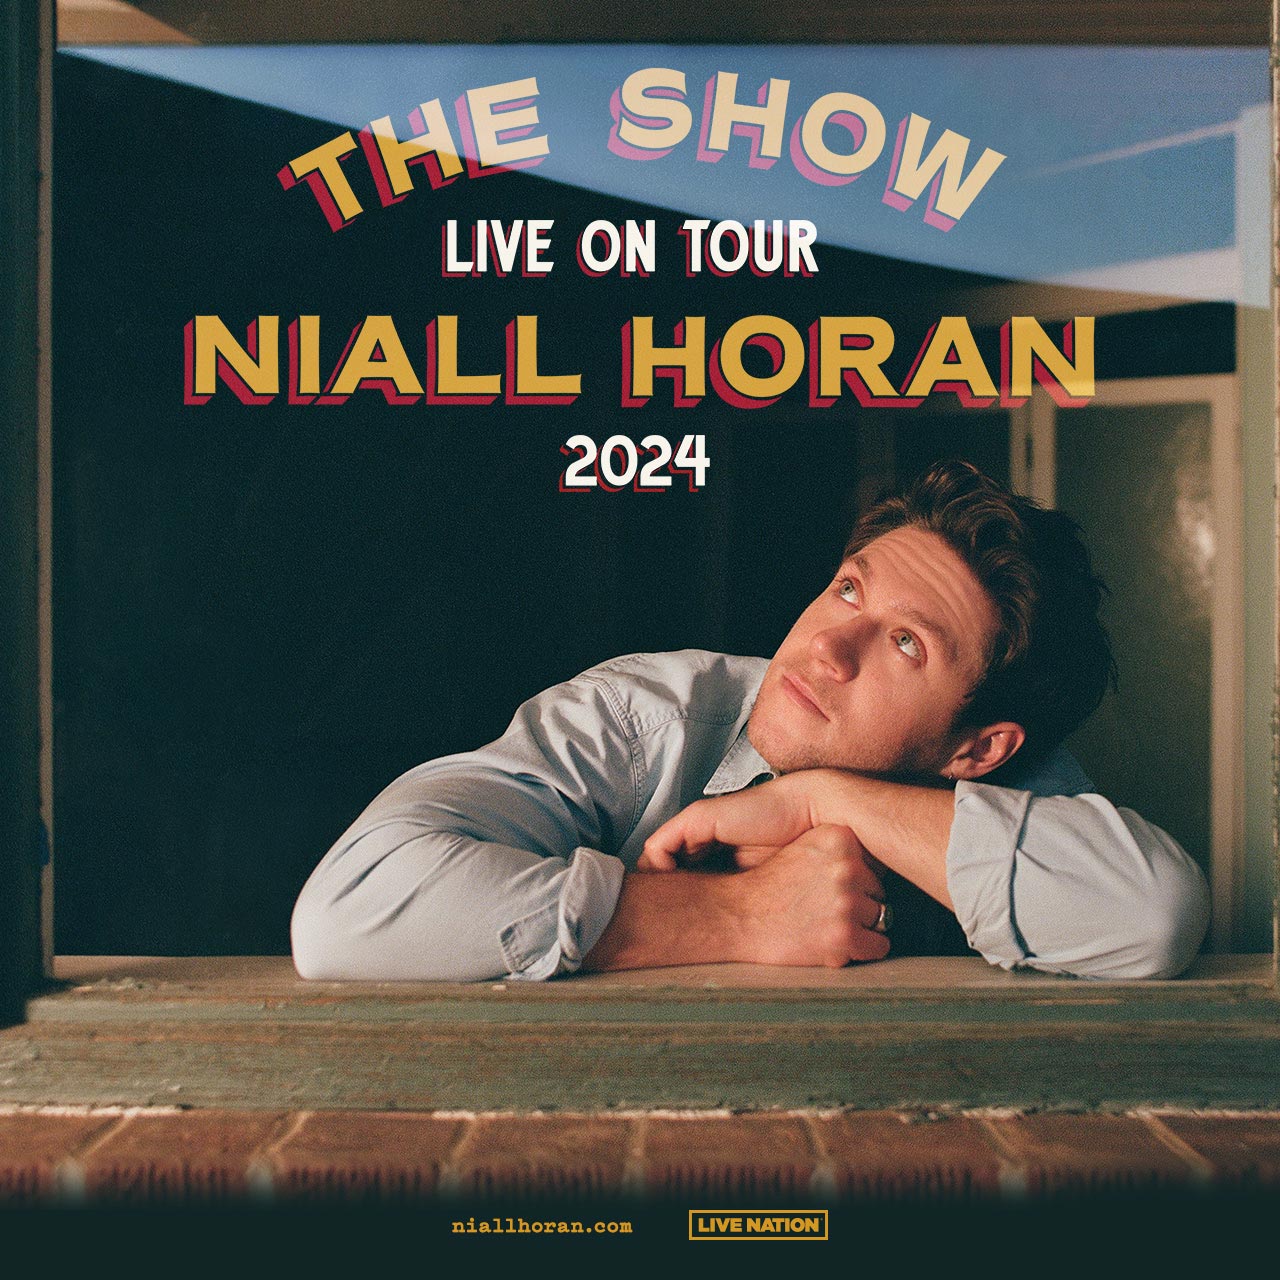 "THE SHOW" LIVE ON TOUR 2024